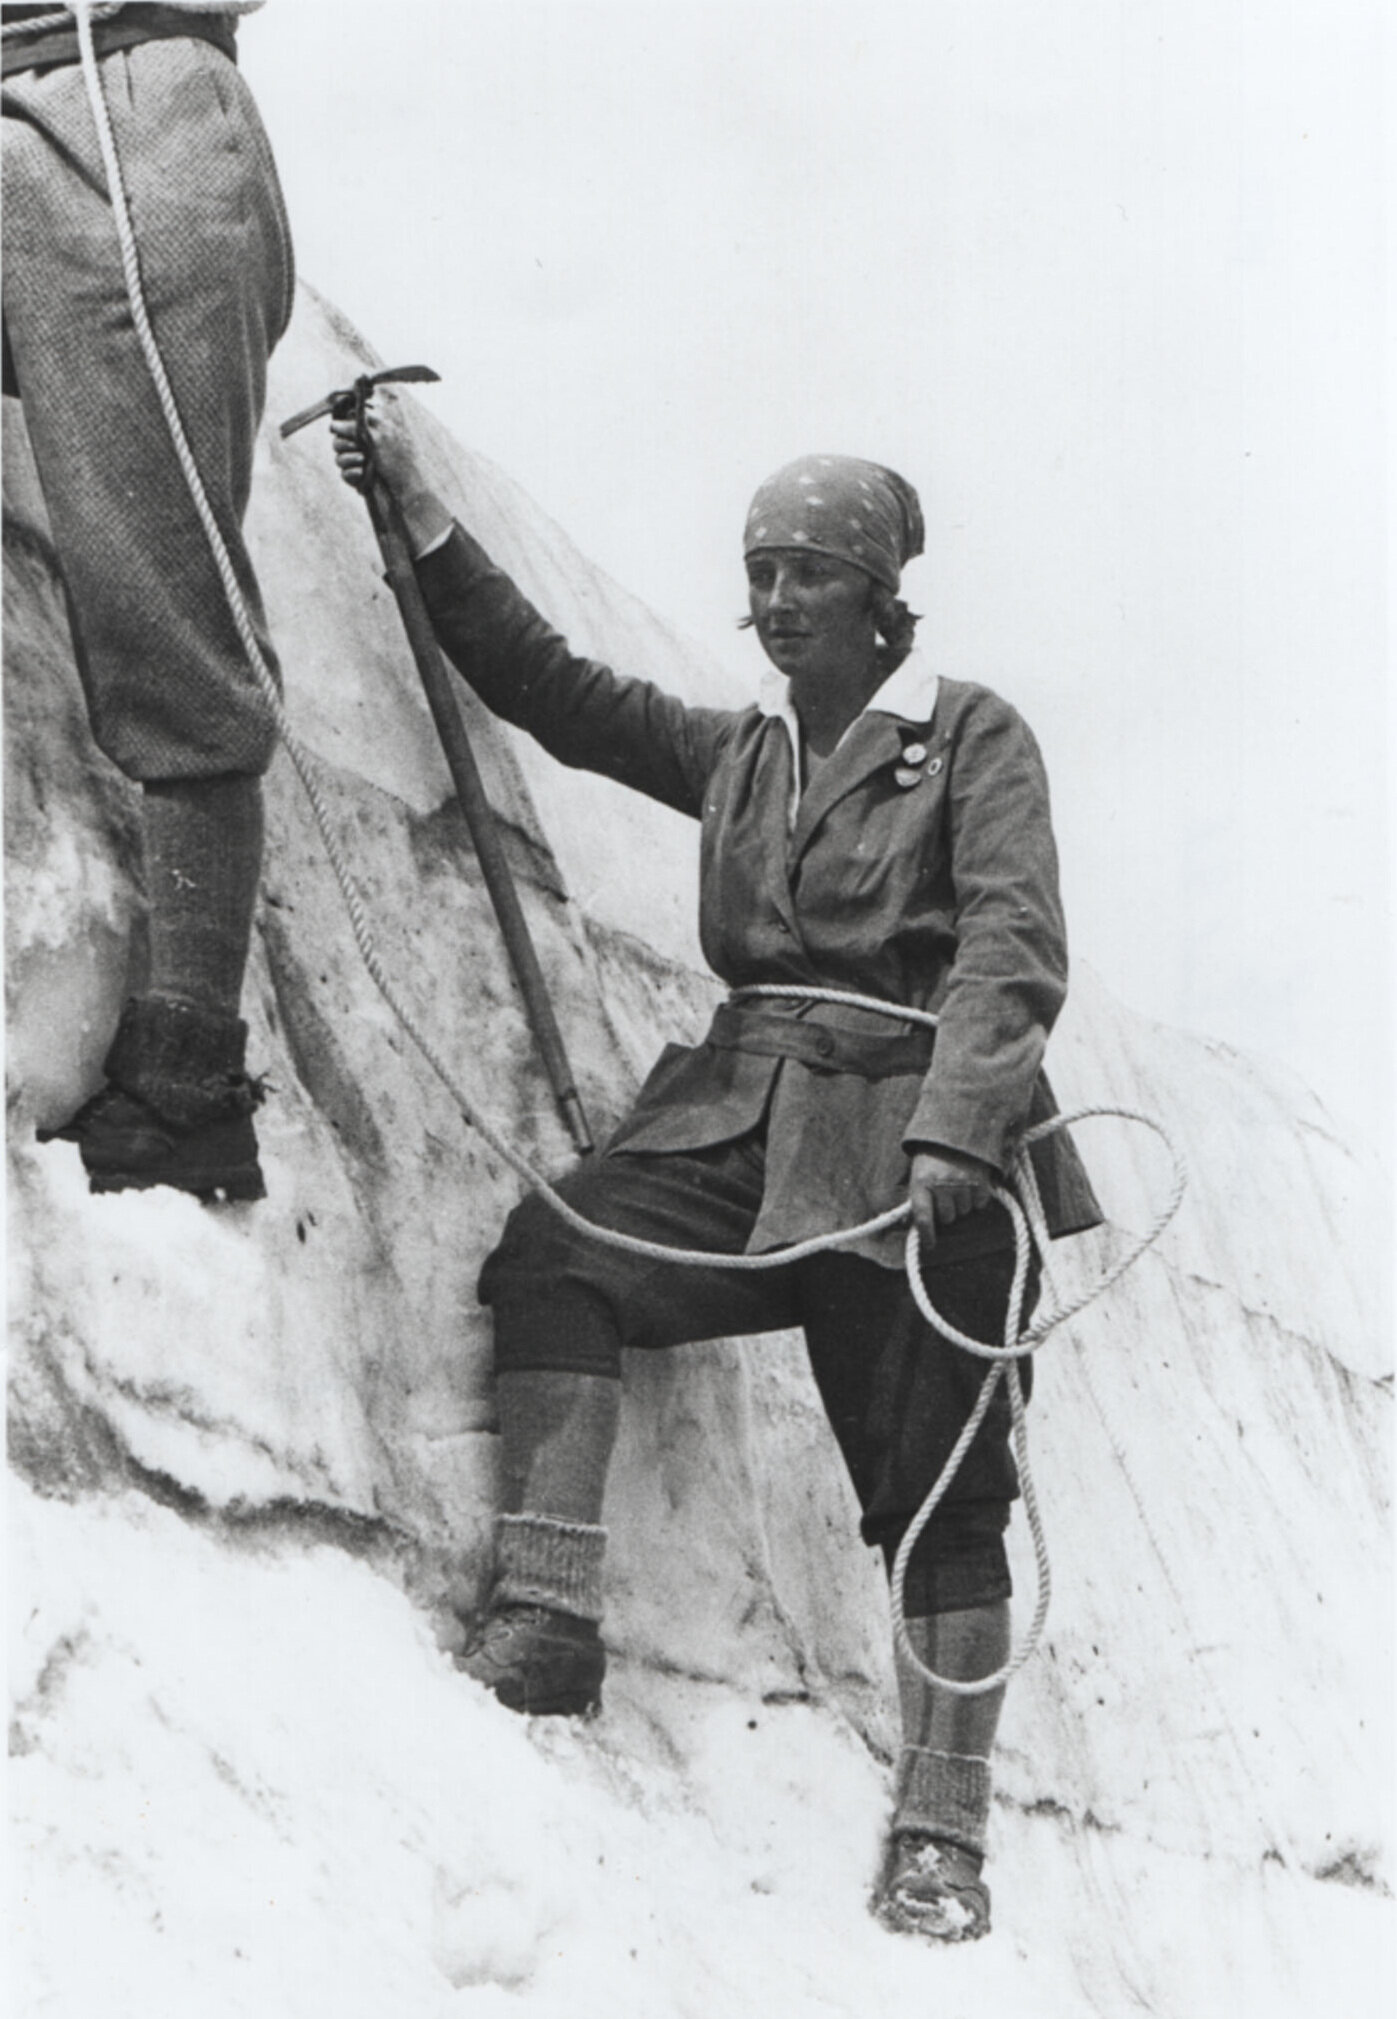 Dorothy Pilley Richards in the Glacier National Park,  Montana, USA, in 1926